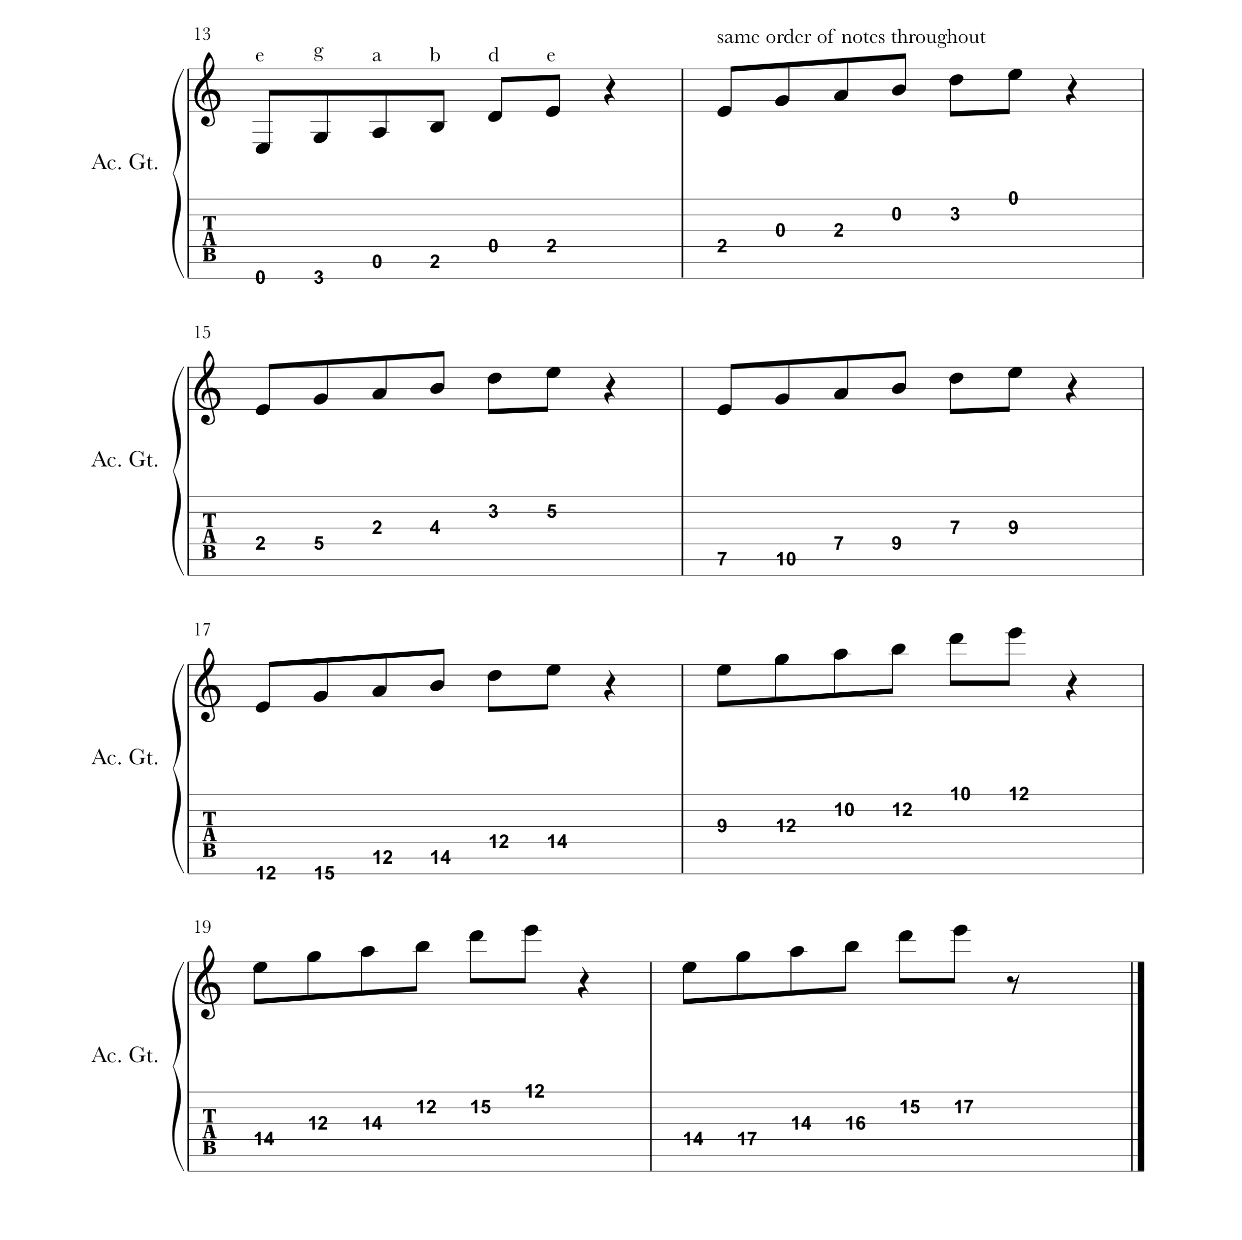 Beginner’s Guide to Jamming: Visualizing the Fretboard